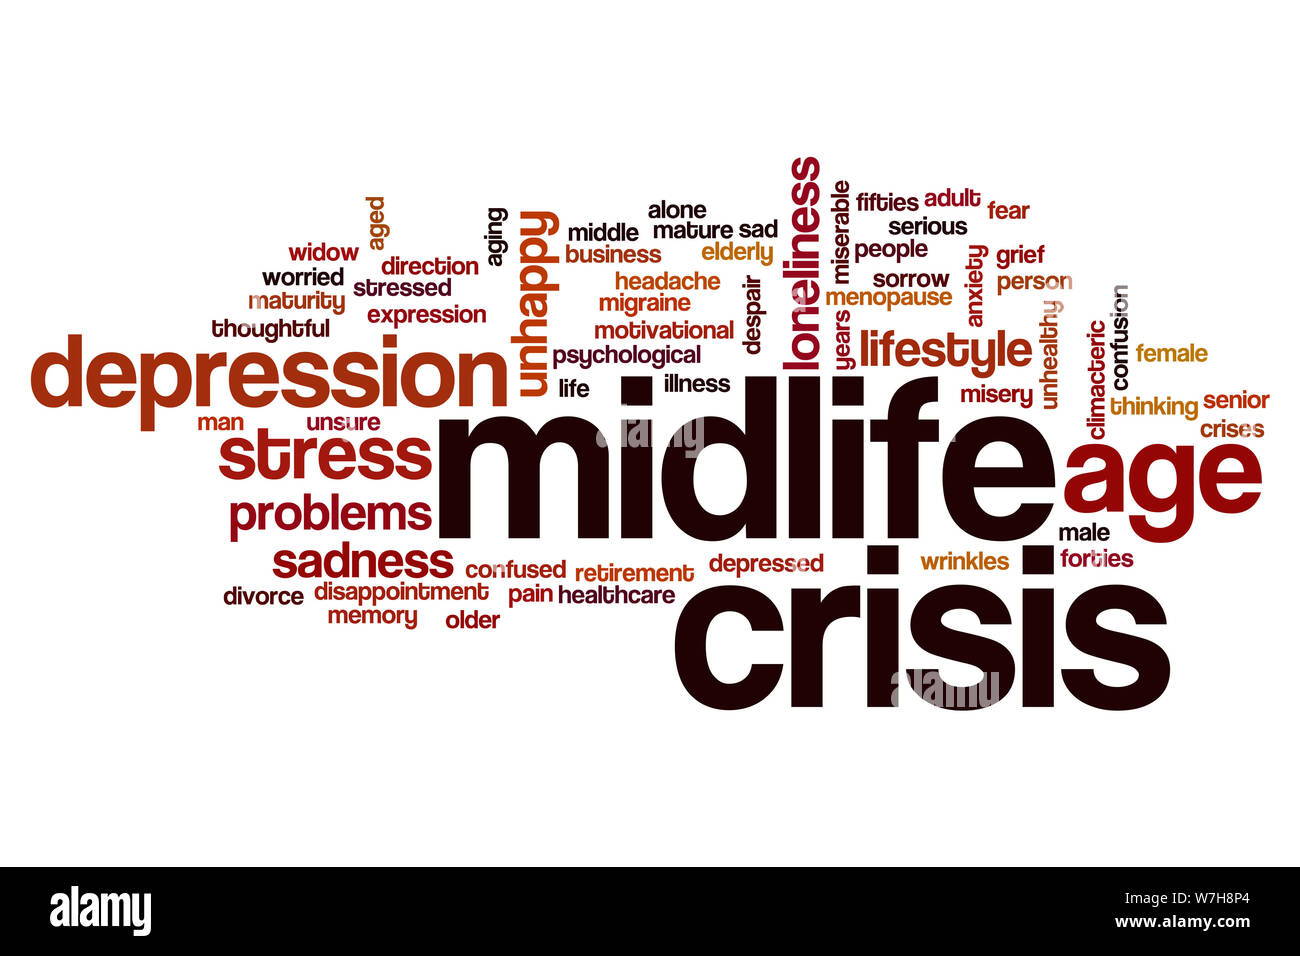 Midlife crisis word cloud concept Stock Photo